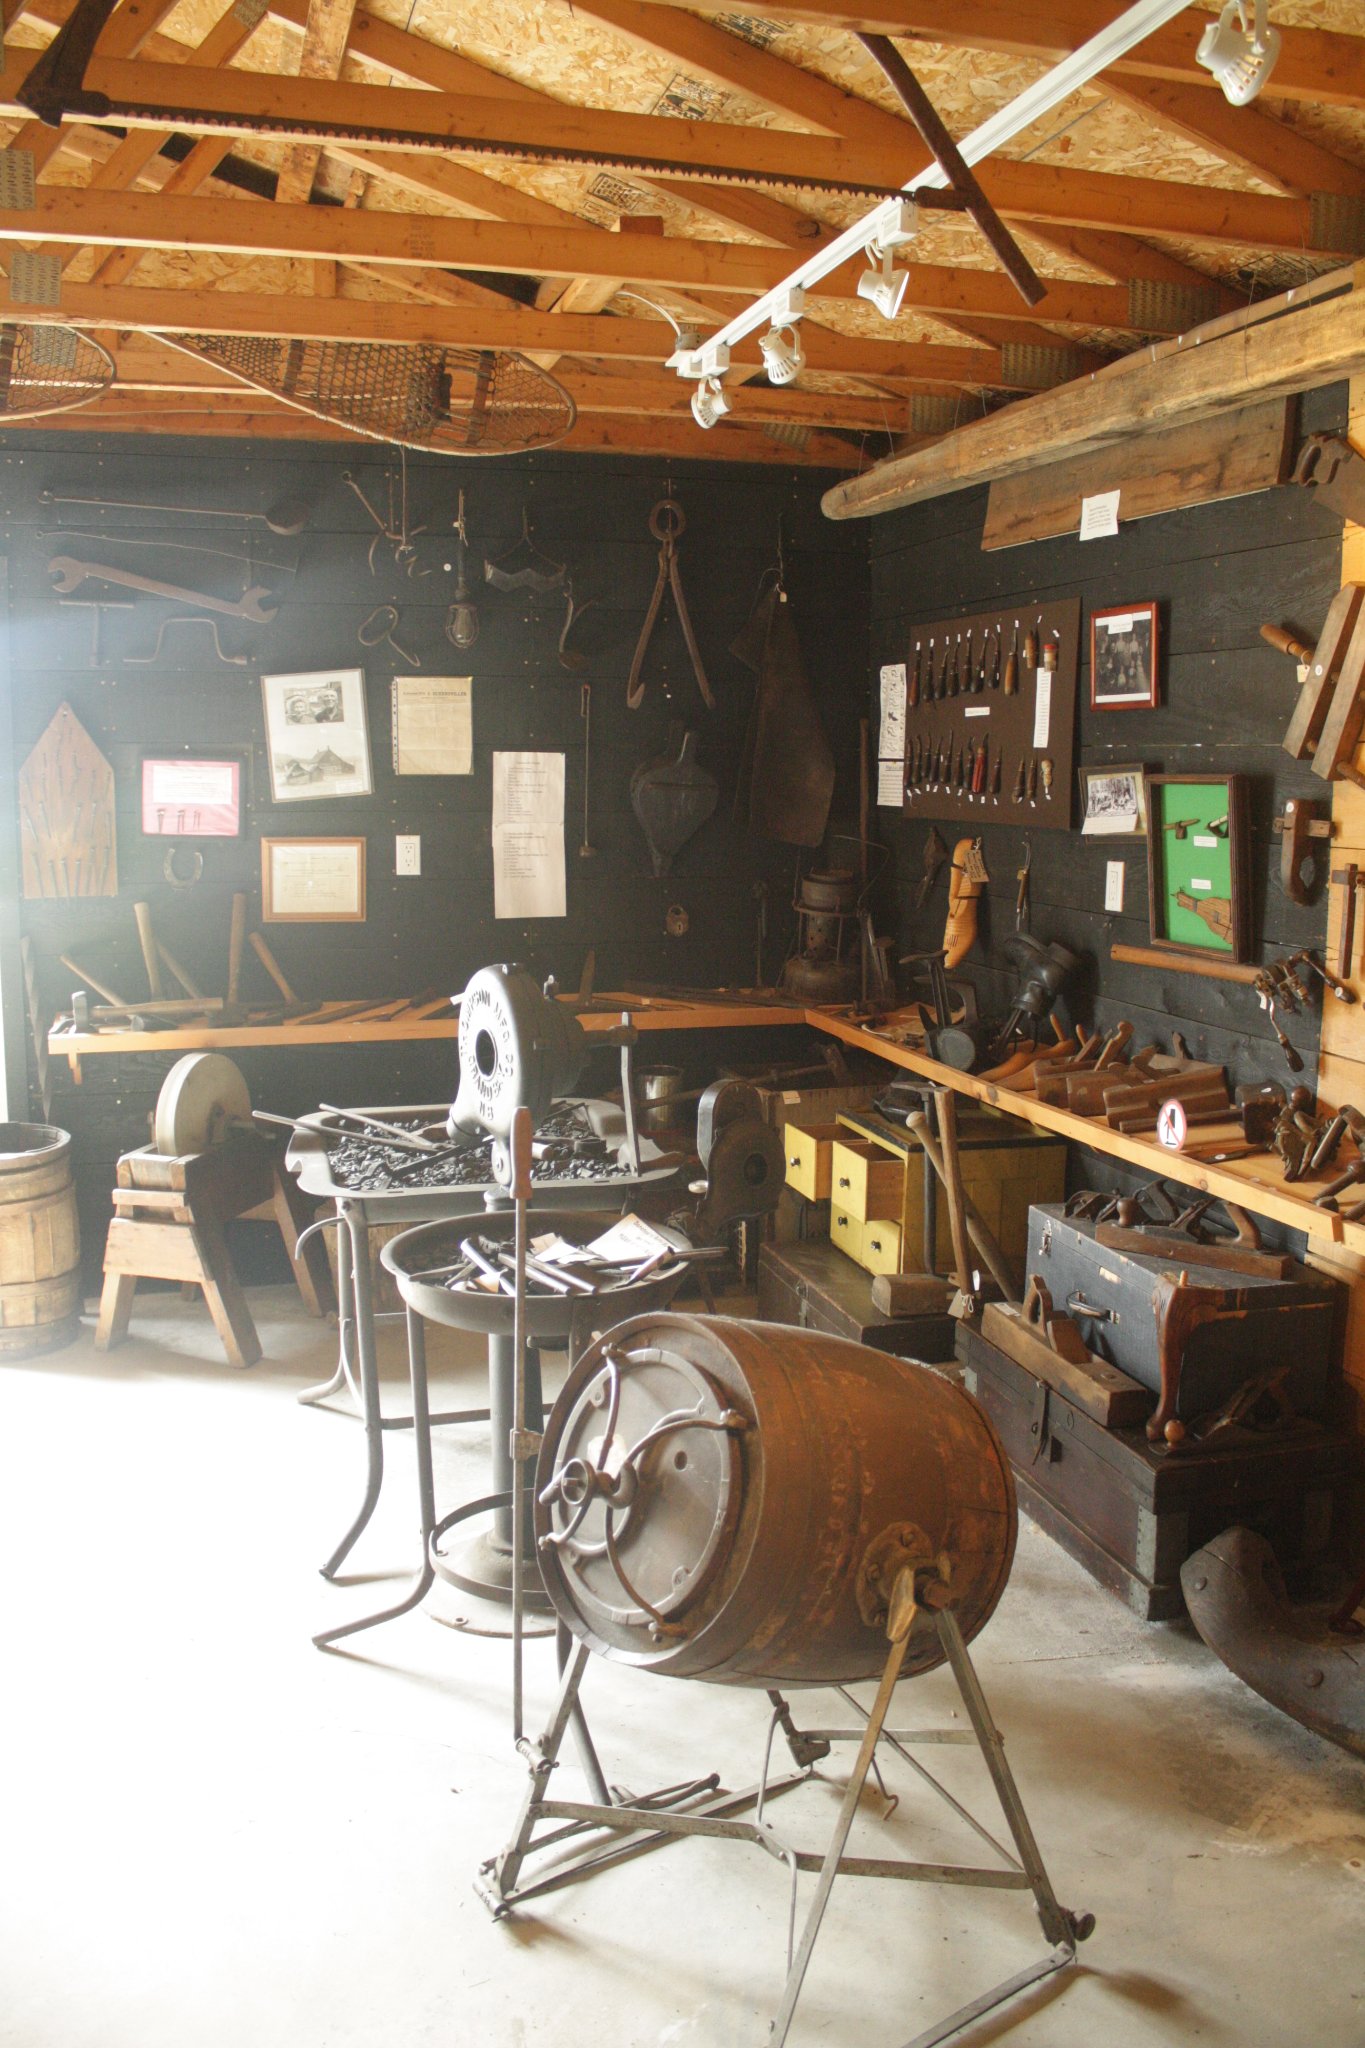 The Blacksmith & Cobbler's Exhibit at the Nipissing Township Museum; the interior of a wooden shed lit by sunlight, filled with antique blacksmithing and cobbler's tools. 